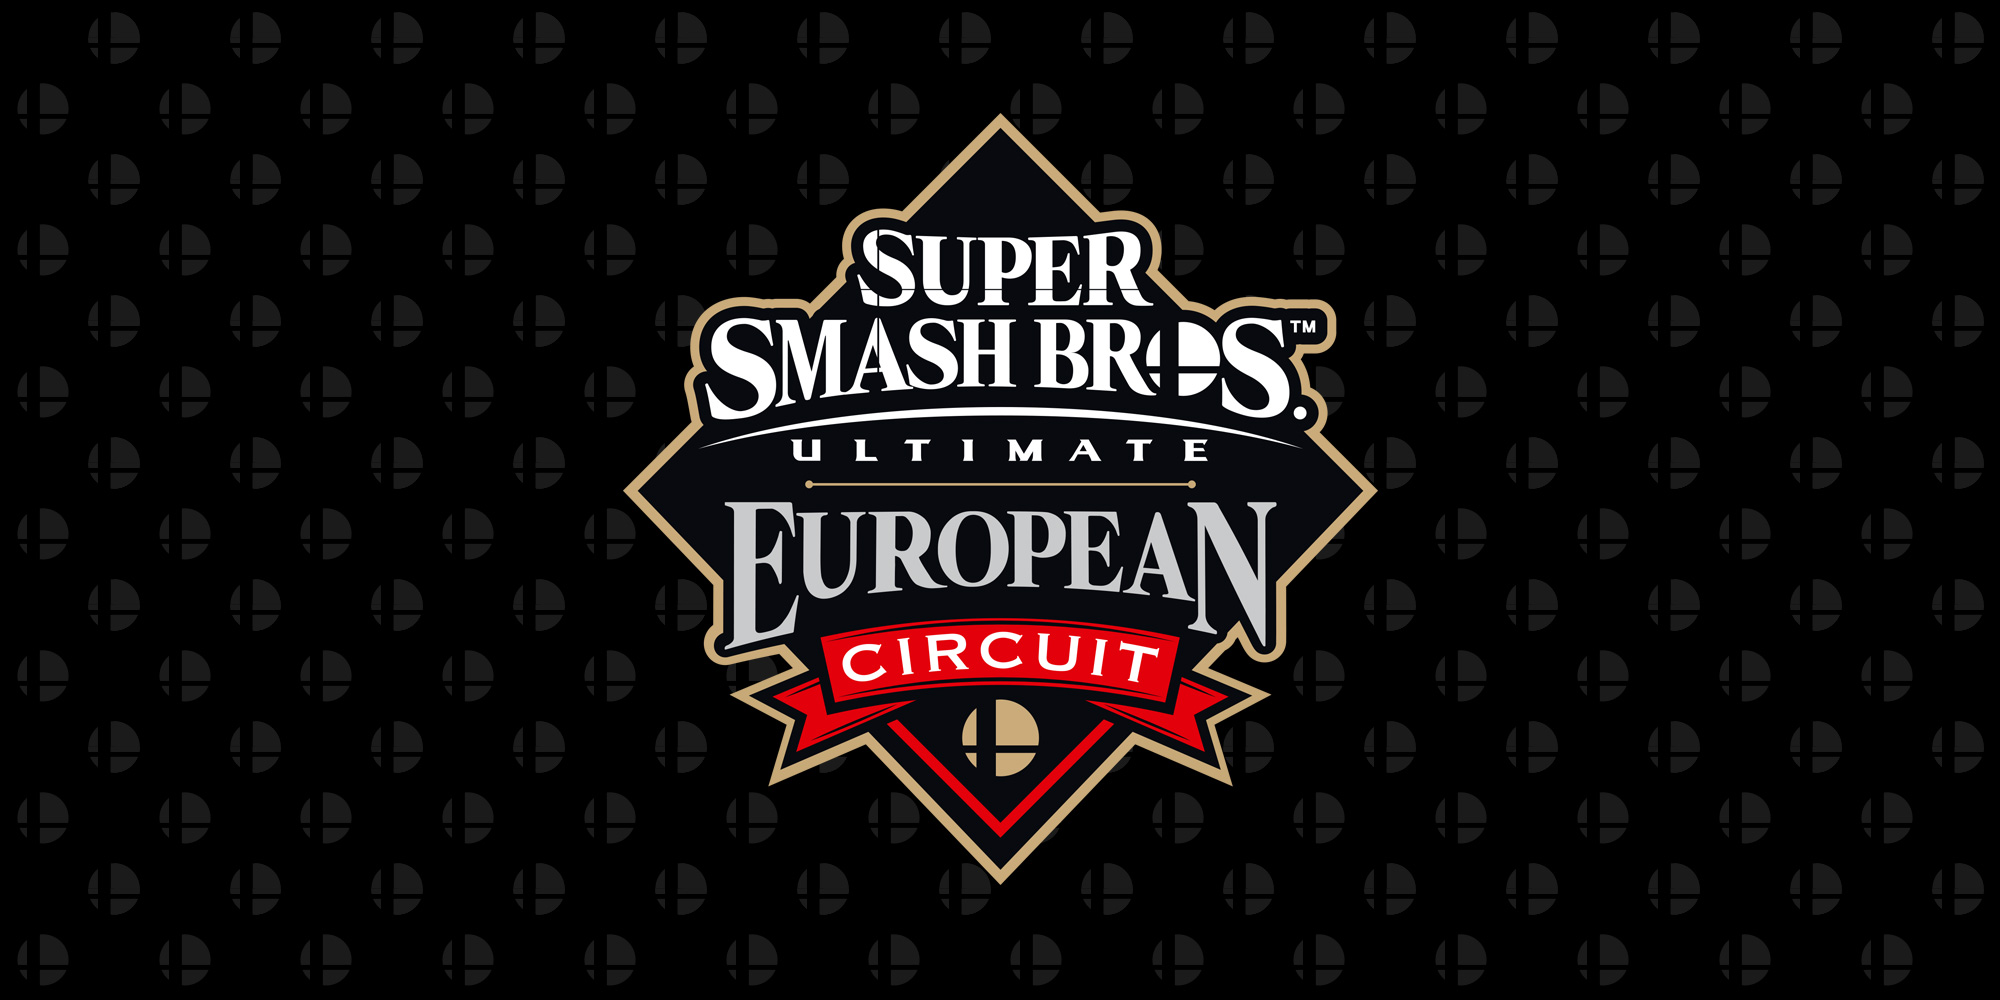 DarkThunder is your DreamHack Leipzig champion – the fourth event of the Super Smash Bros. Ultimate European Circuit!